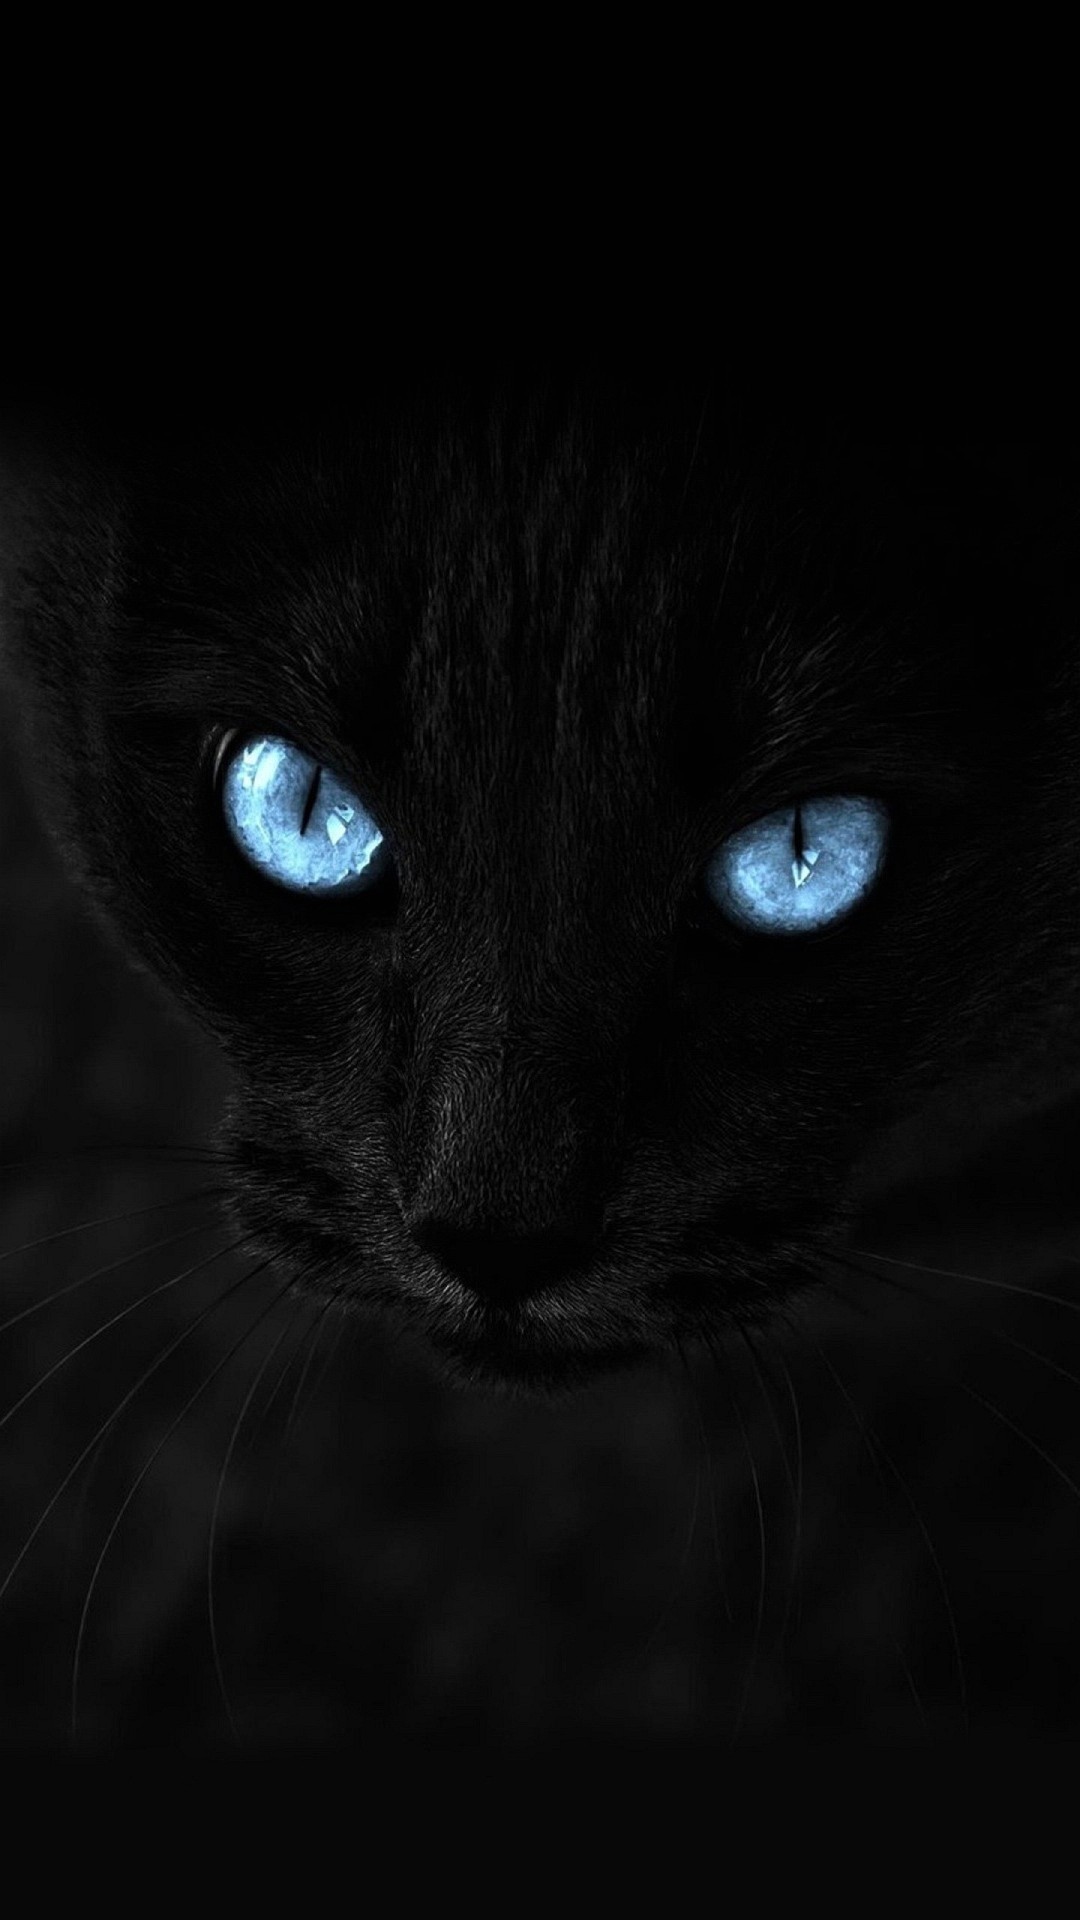 1080x1920 Wallpaper iphone 6 plus cat blue eyes 5 5 inches